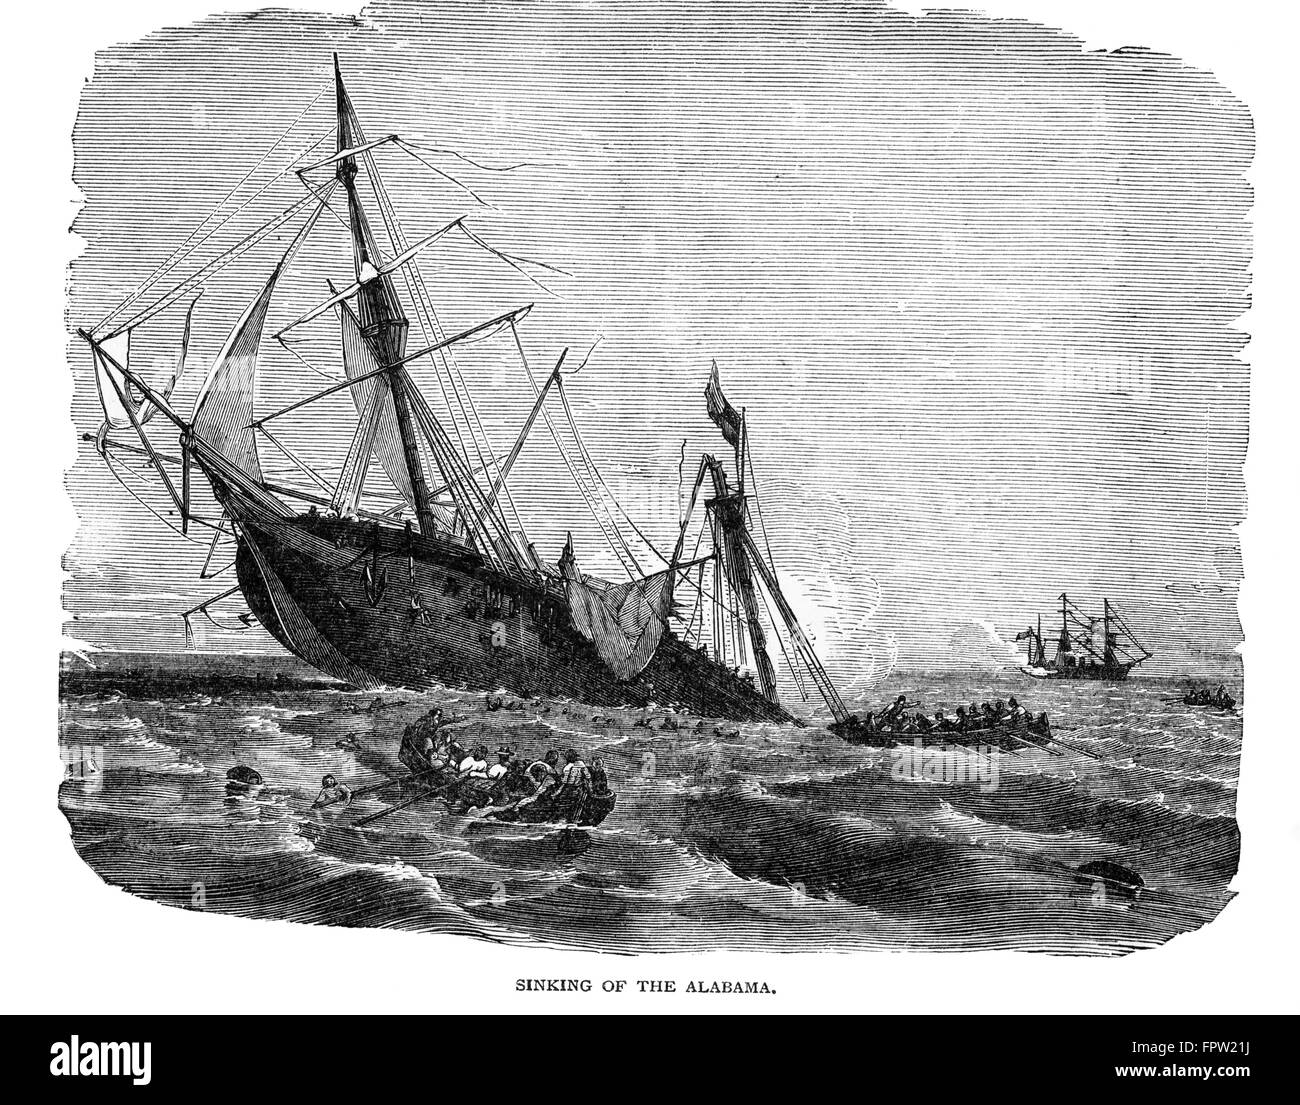 1860s 1864 SINKING OF CONFEDERATE SHIP ALABAMA BY THE UNION SHIP KEARSARGE DURING AMERICAN CIVIL WAR NAVAL BATTLE Stock Photo